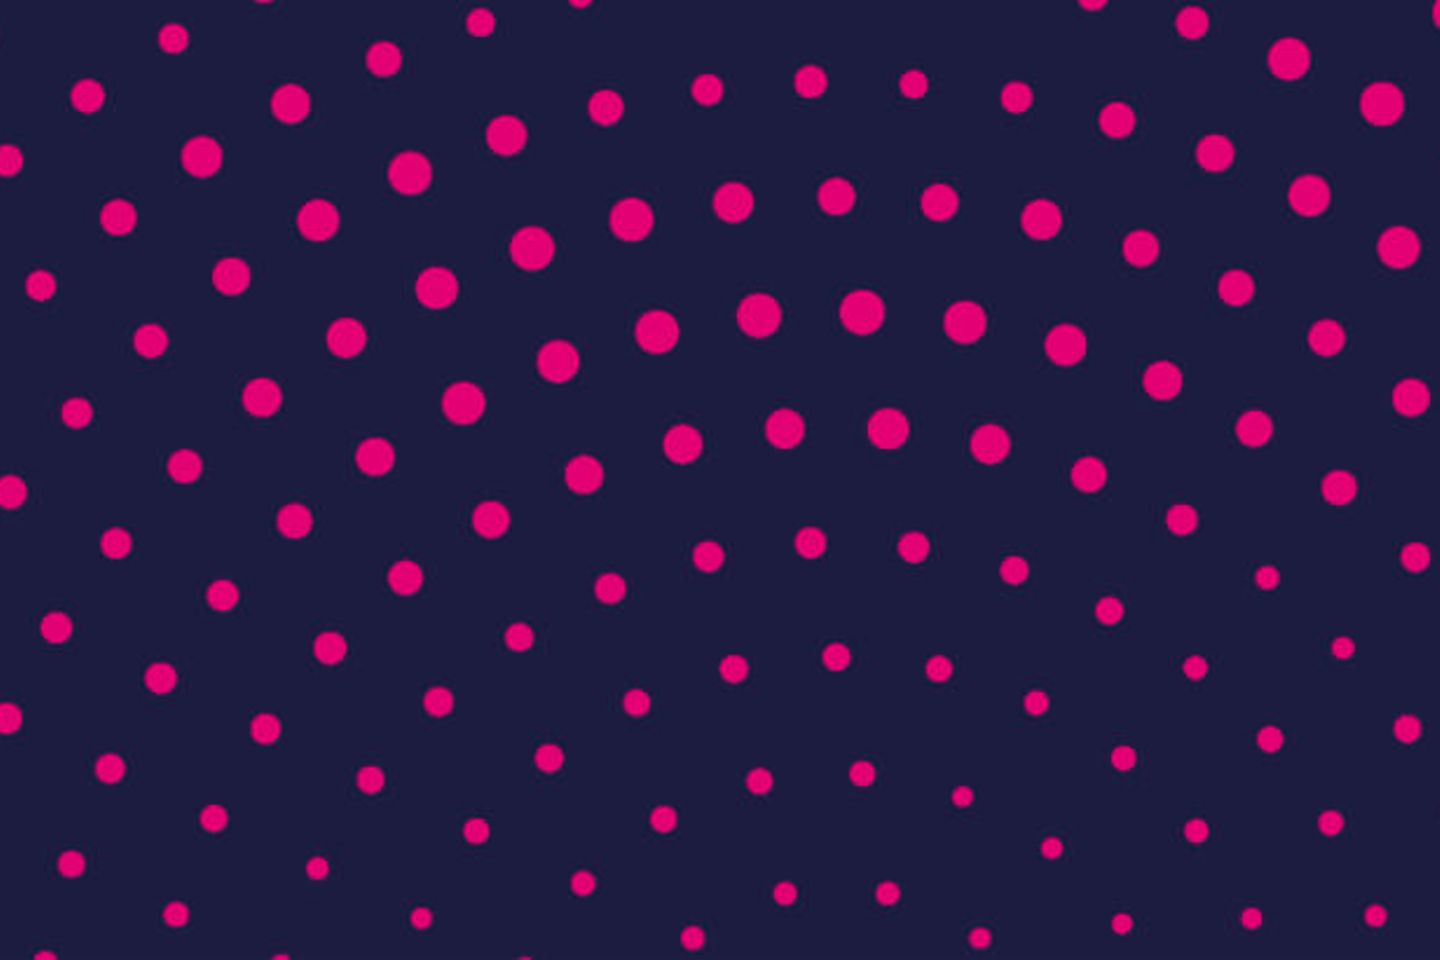 Pink dots arranged radially on a dark blue background